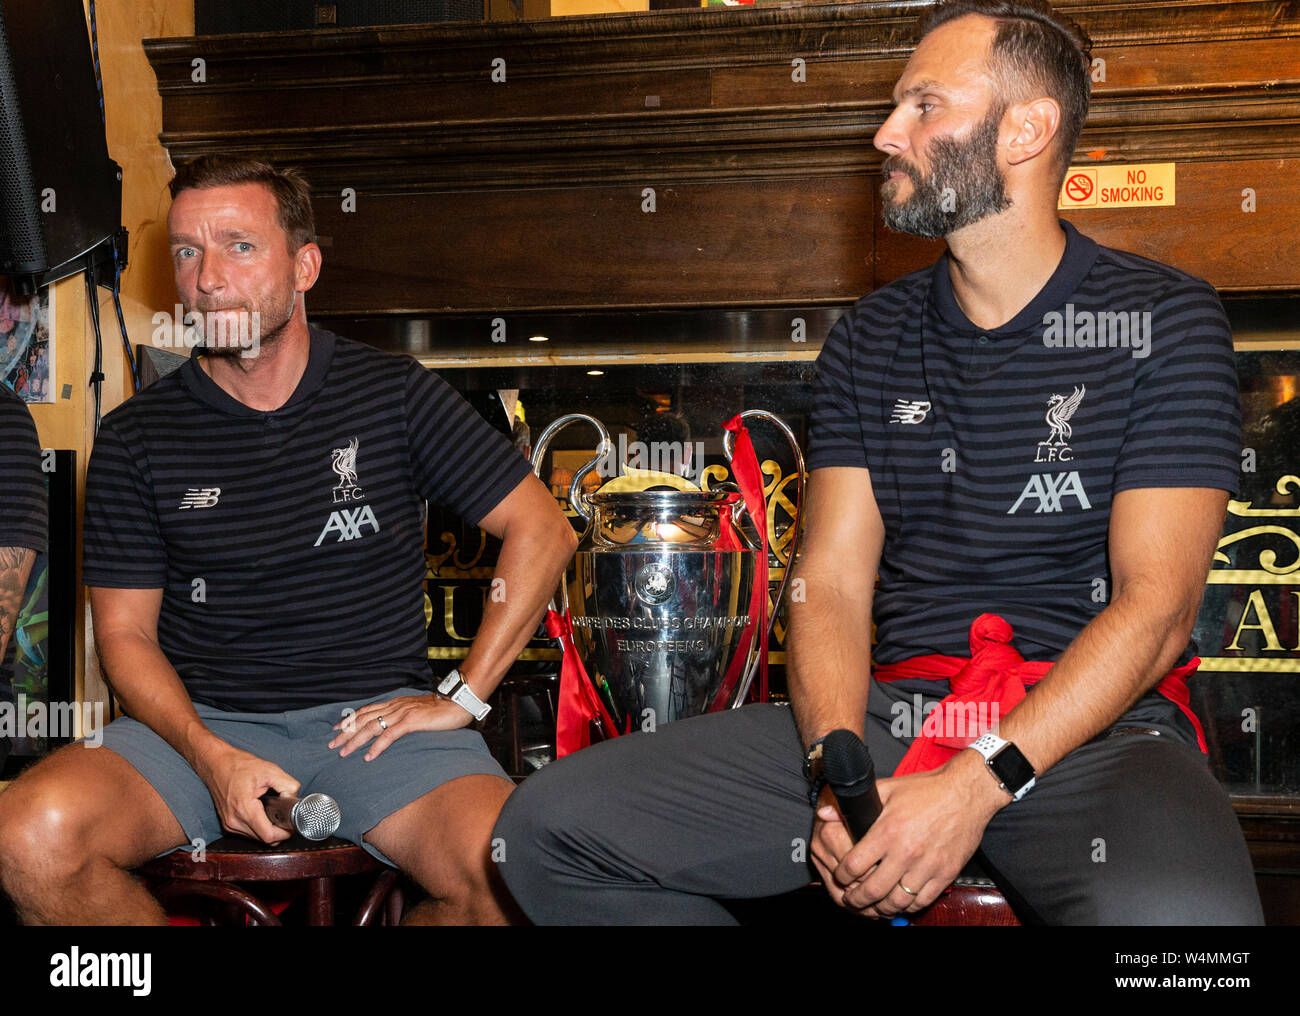 New York, NY - July 23, 2019: Vladi Smicer, Patrick Berger and UEFA Champions League Cup on display during Liverpool FC Fan Event at Carragher’s Bar Stock Photo